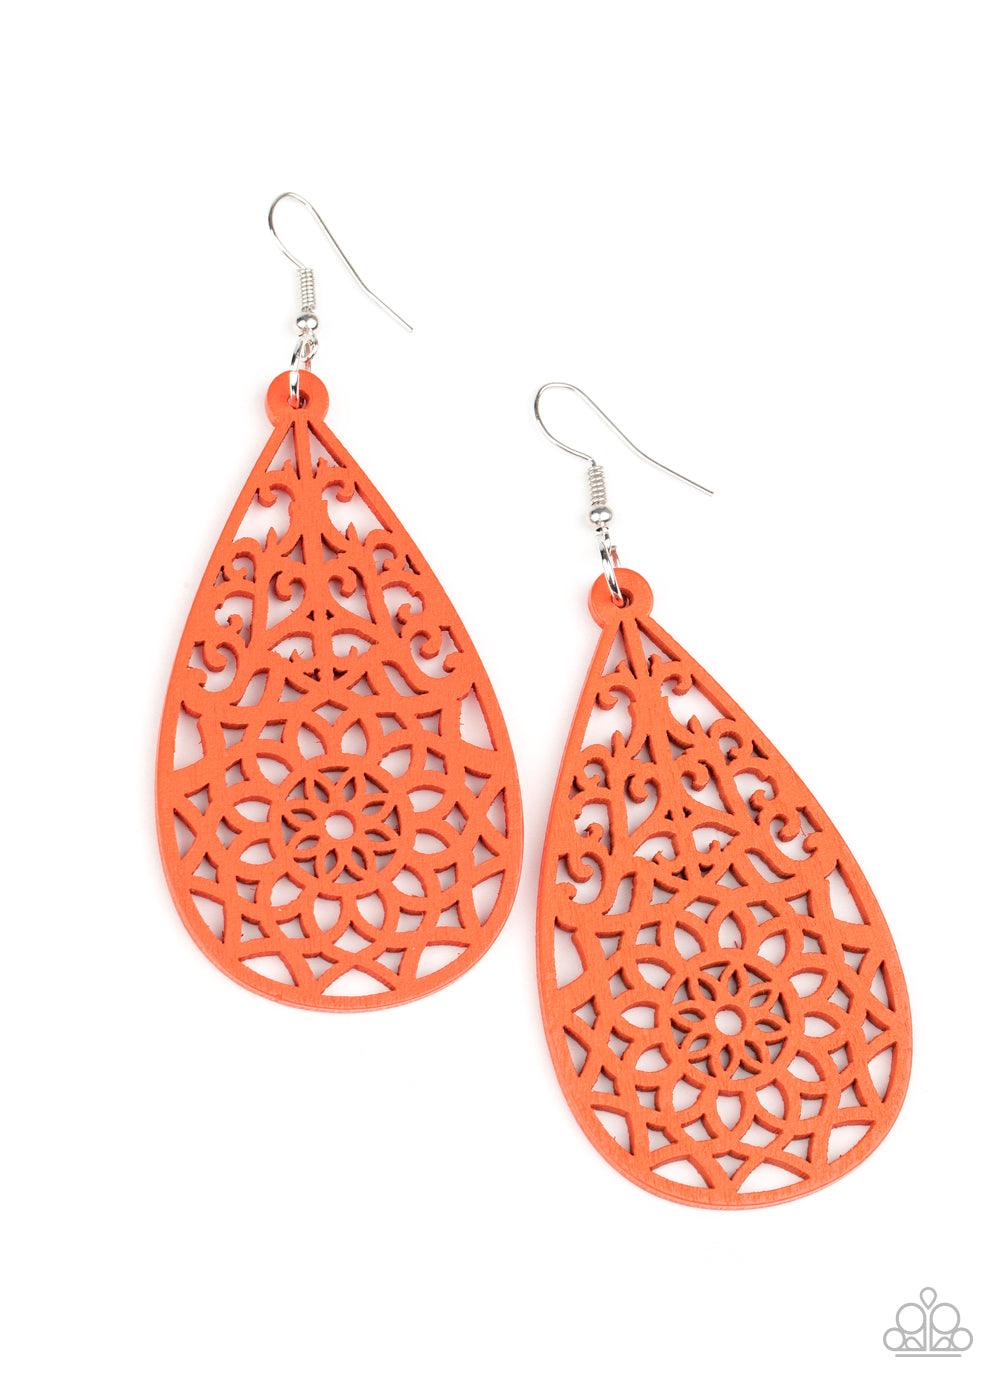 Paparazzi Accessories Seaside Sunsets - Orange A refreshing Amberglow wooden teardrop is cut into a stenciled floral pattern, creating a whimsical lure. Earring attaches to a standard fishhook fitting. Sold as one pair of earrings. Jewelry